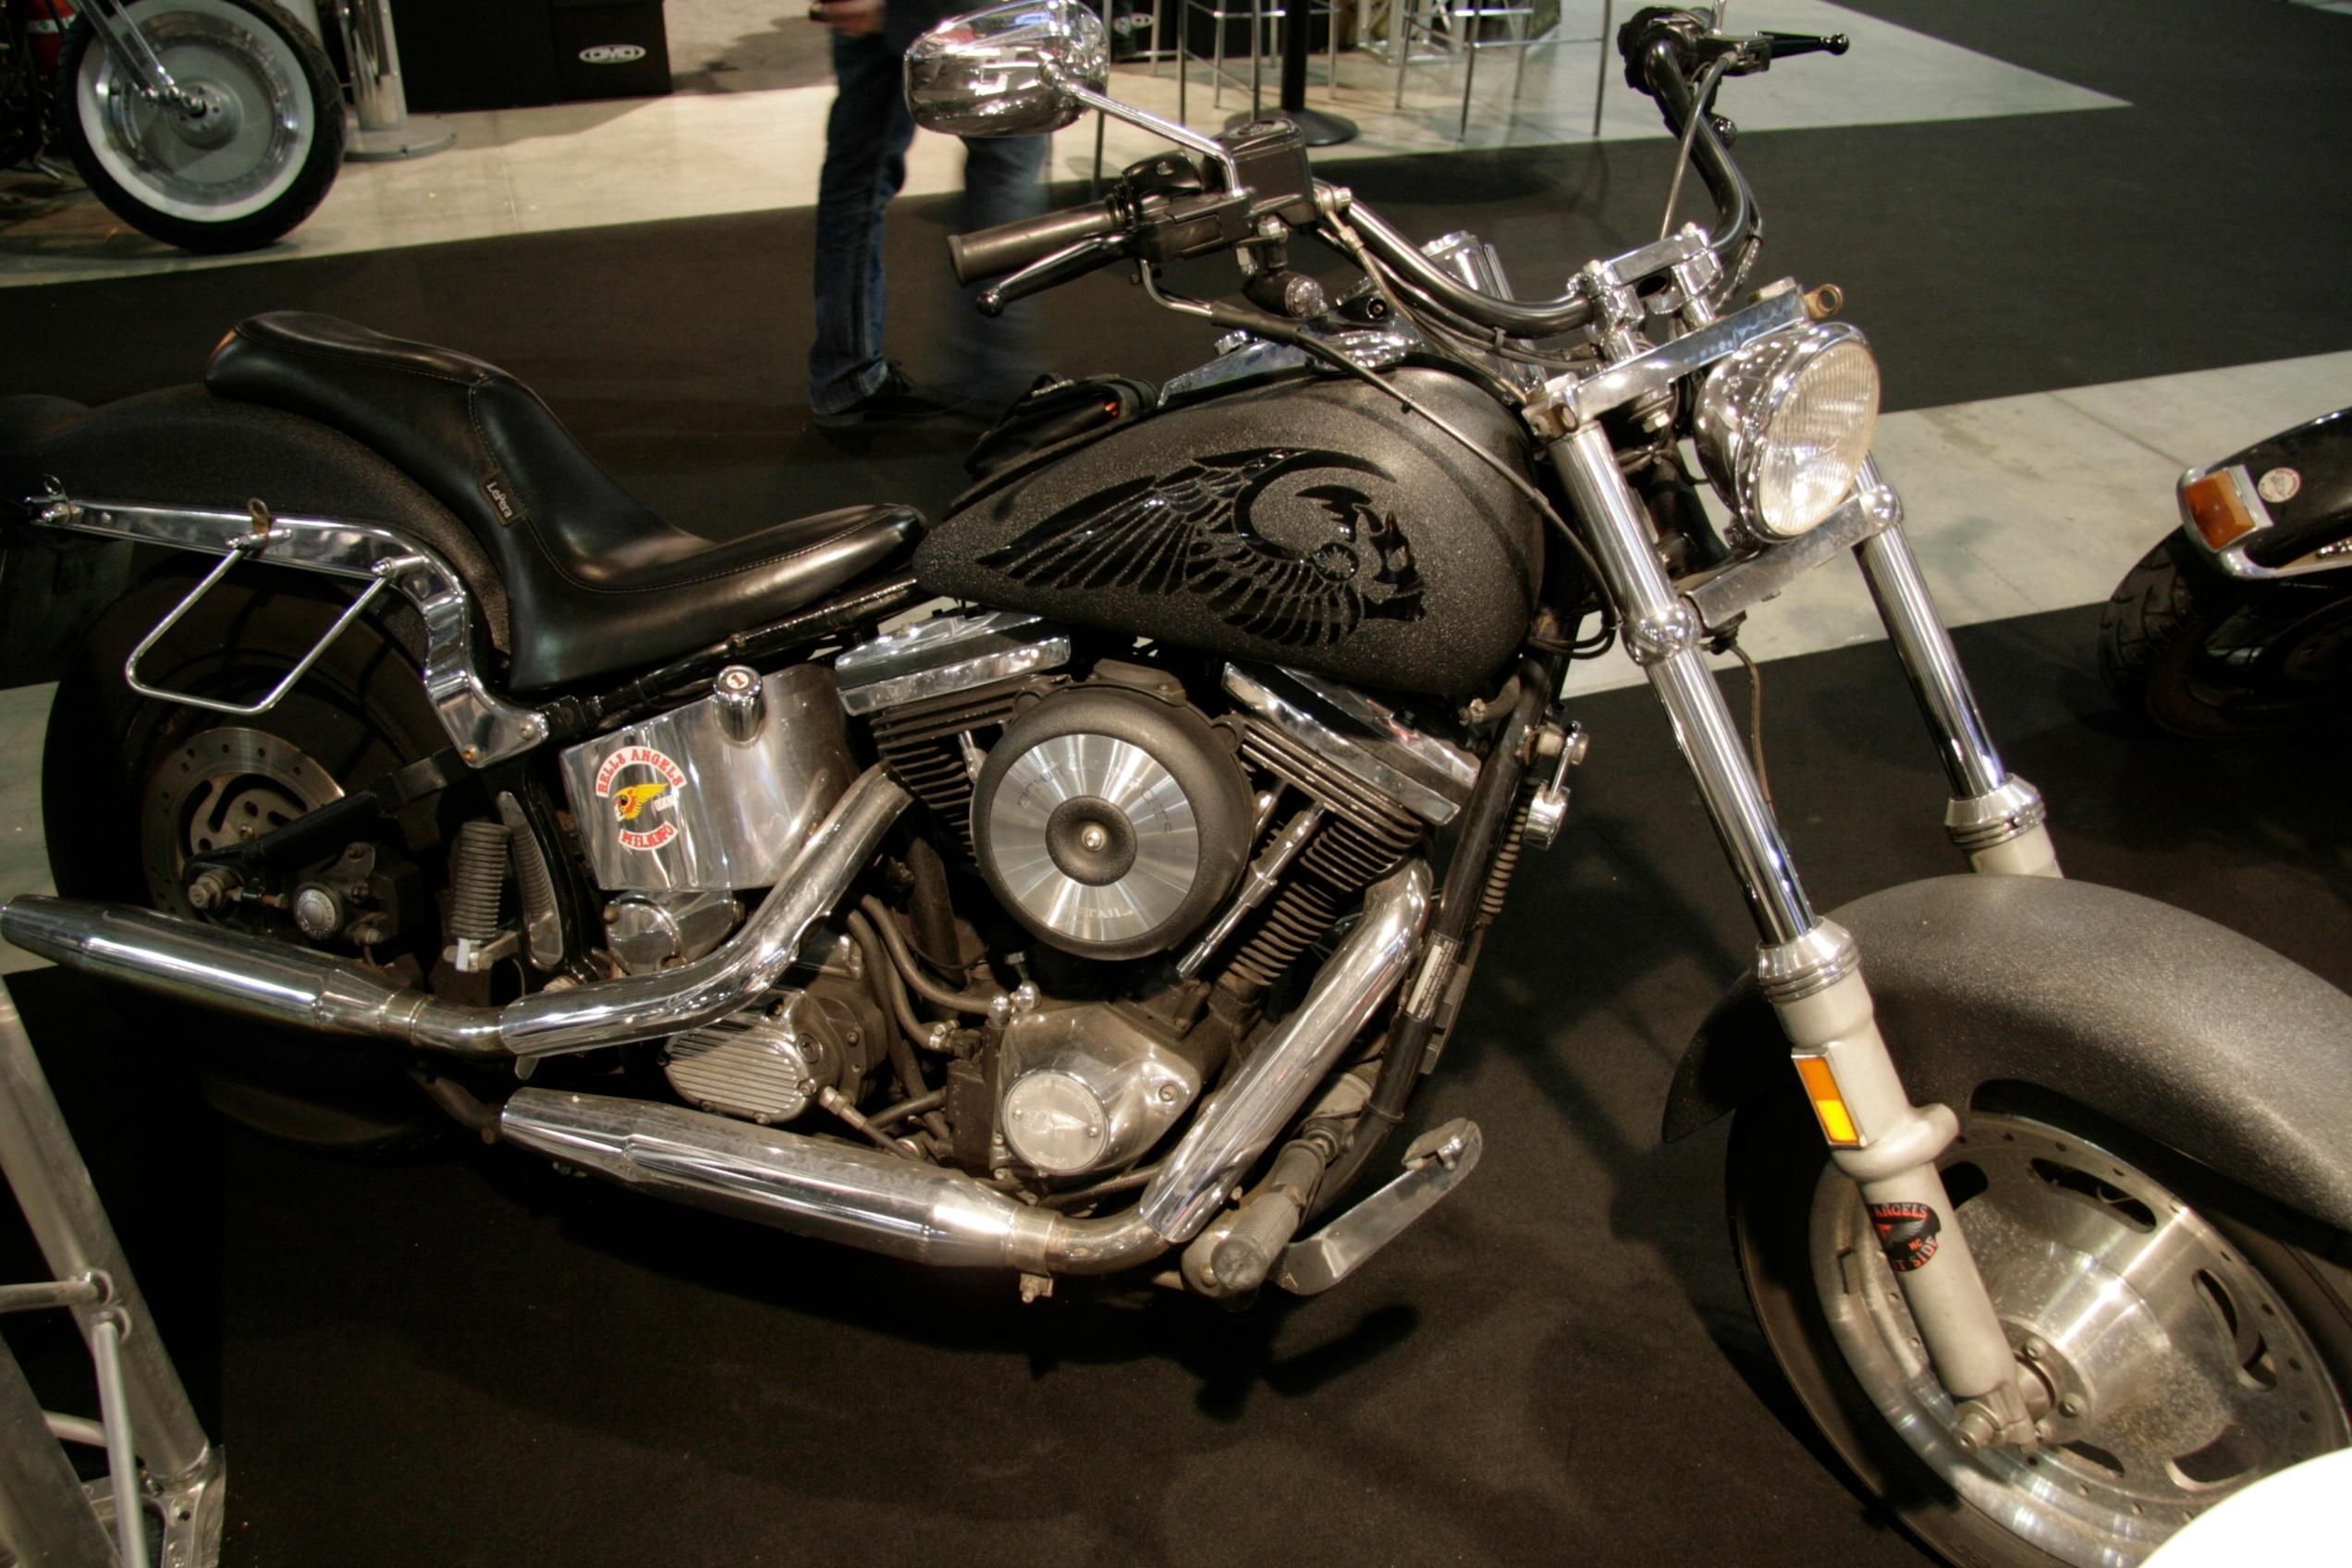 Hells Angels at EICMA 2013 - The bikes look authentic